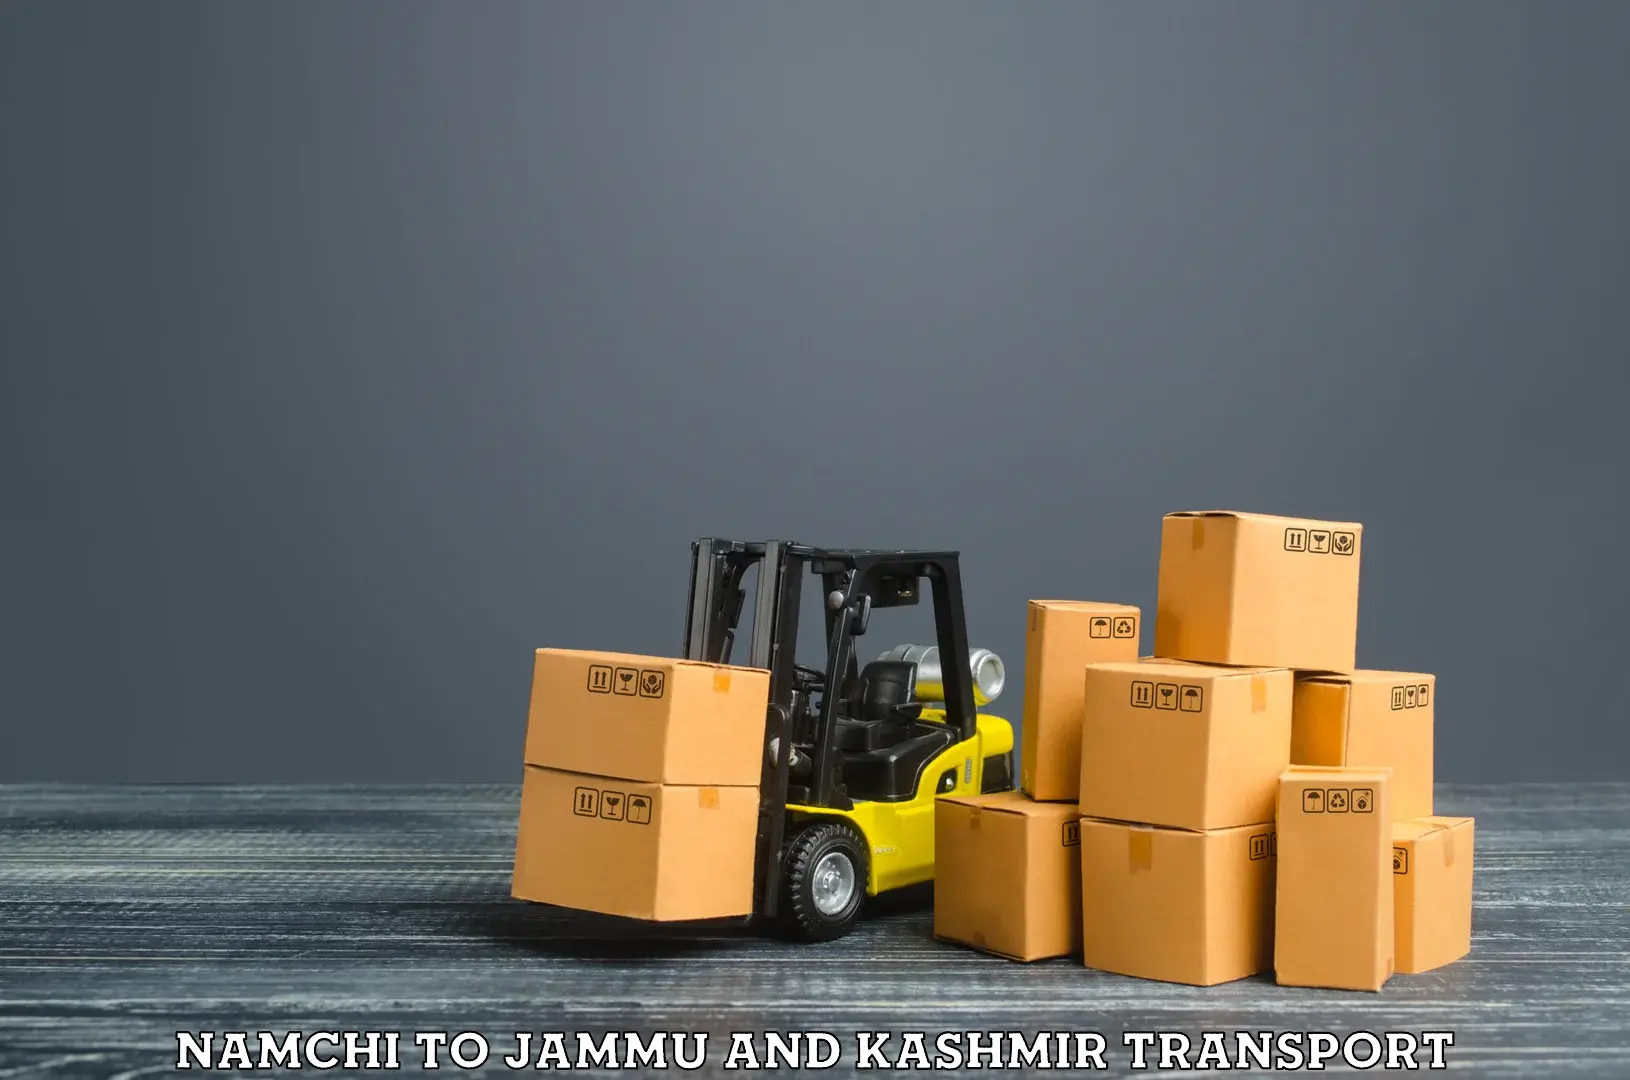 Container transport service Namchi to Jammu and Kashmir